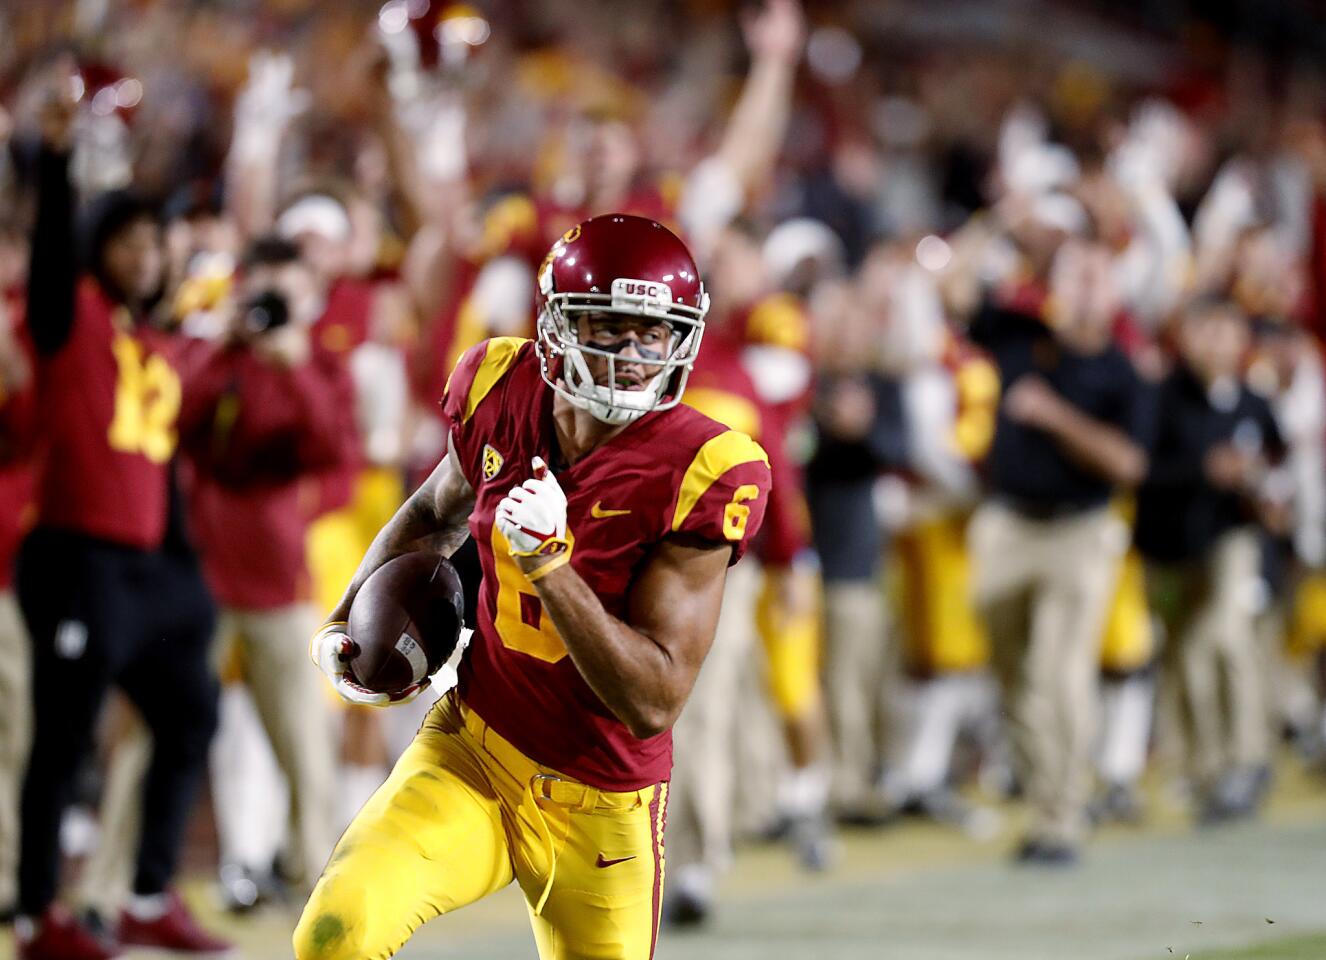 USC wide receiver Michael Pittman heads to the end zone for his first touchdown of the second quarter against Colorado on Saturday night at the Coliseum.